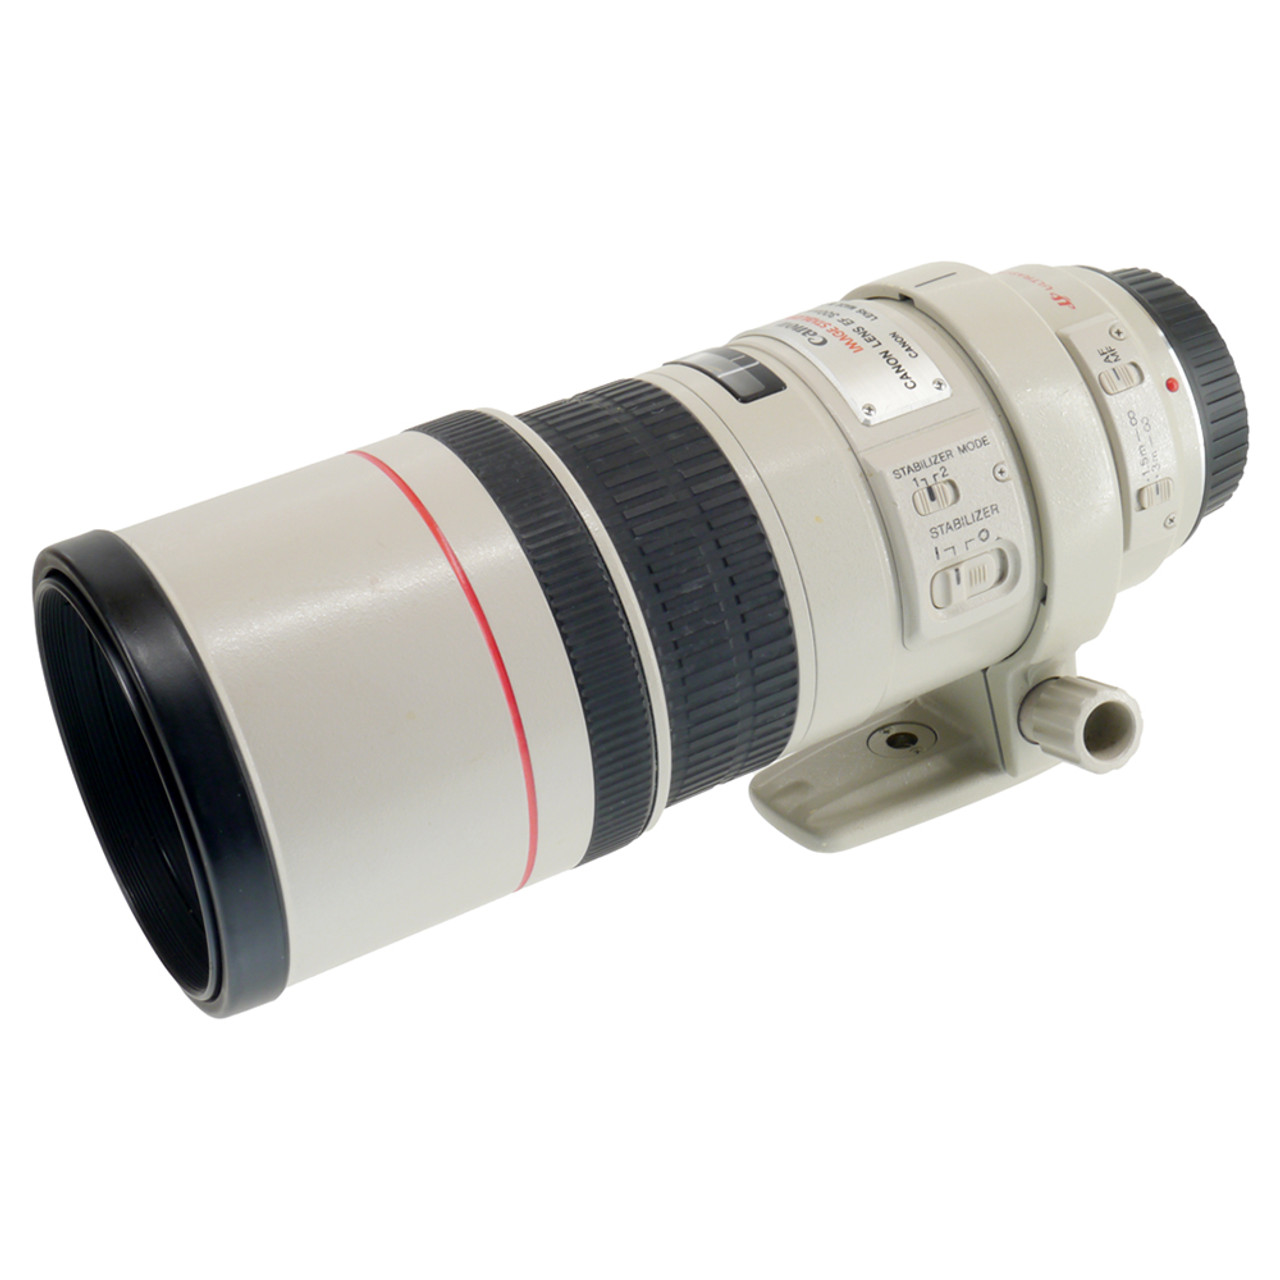 USED CANON EF 300MM F4 L IS